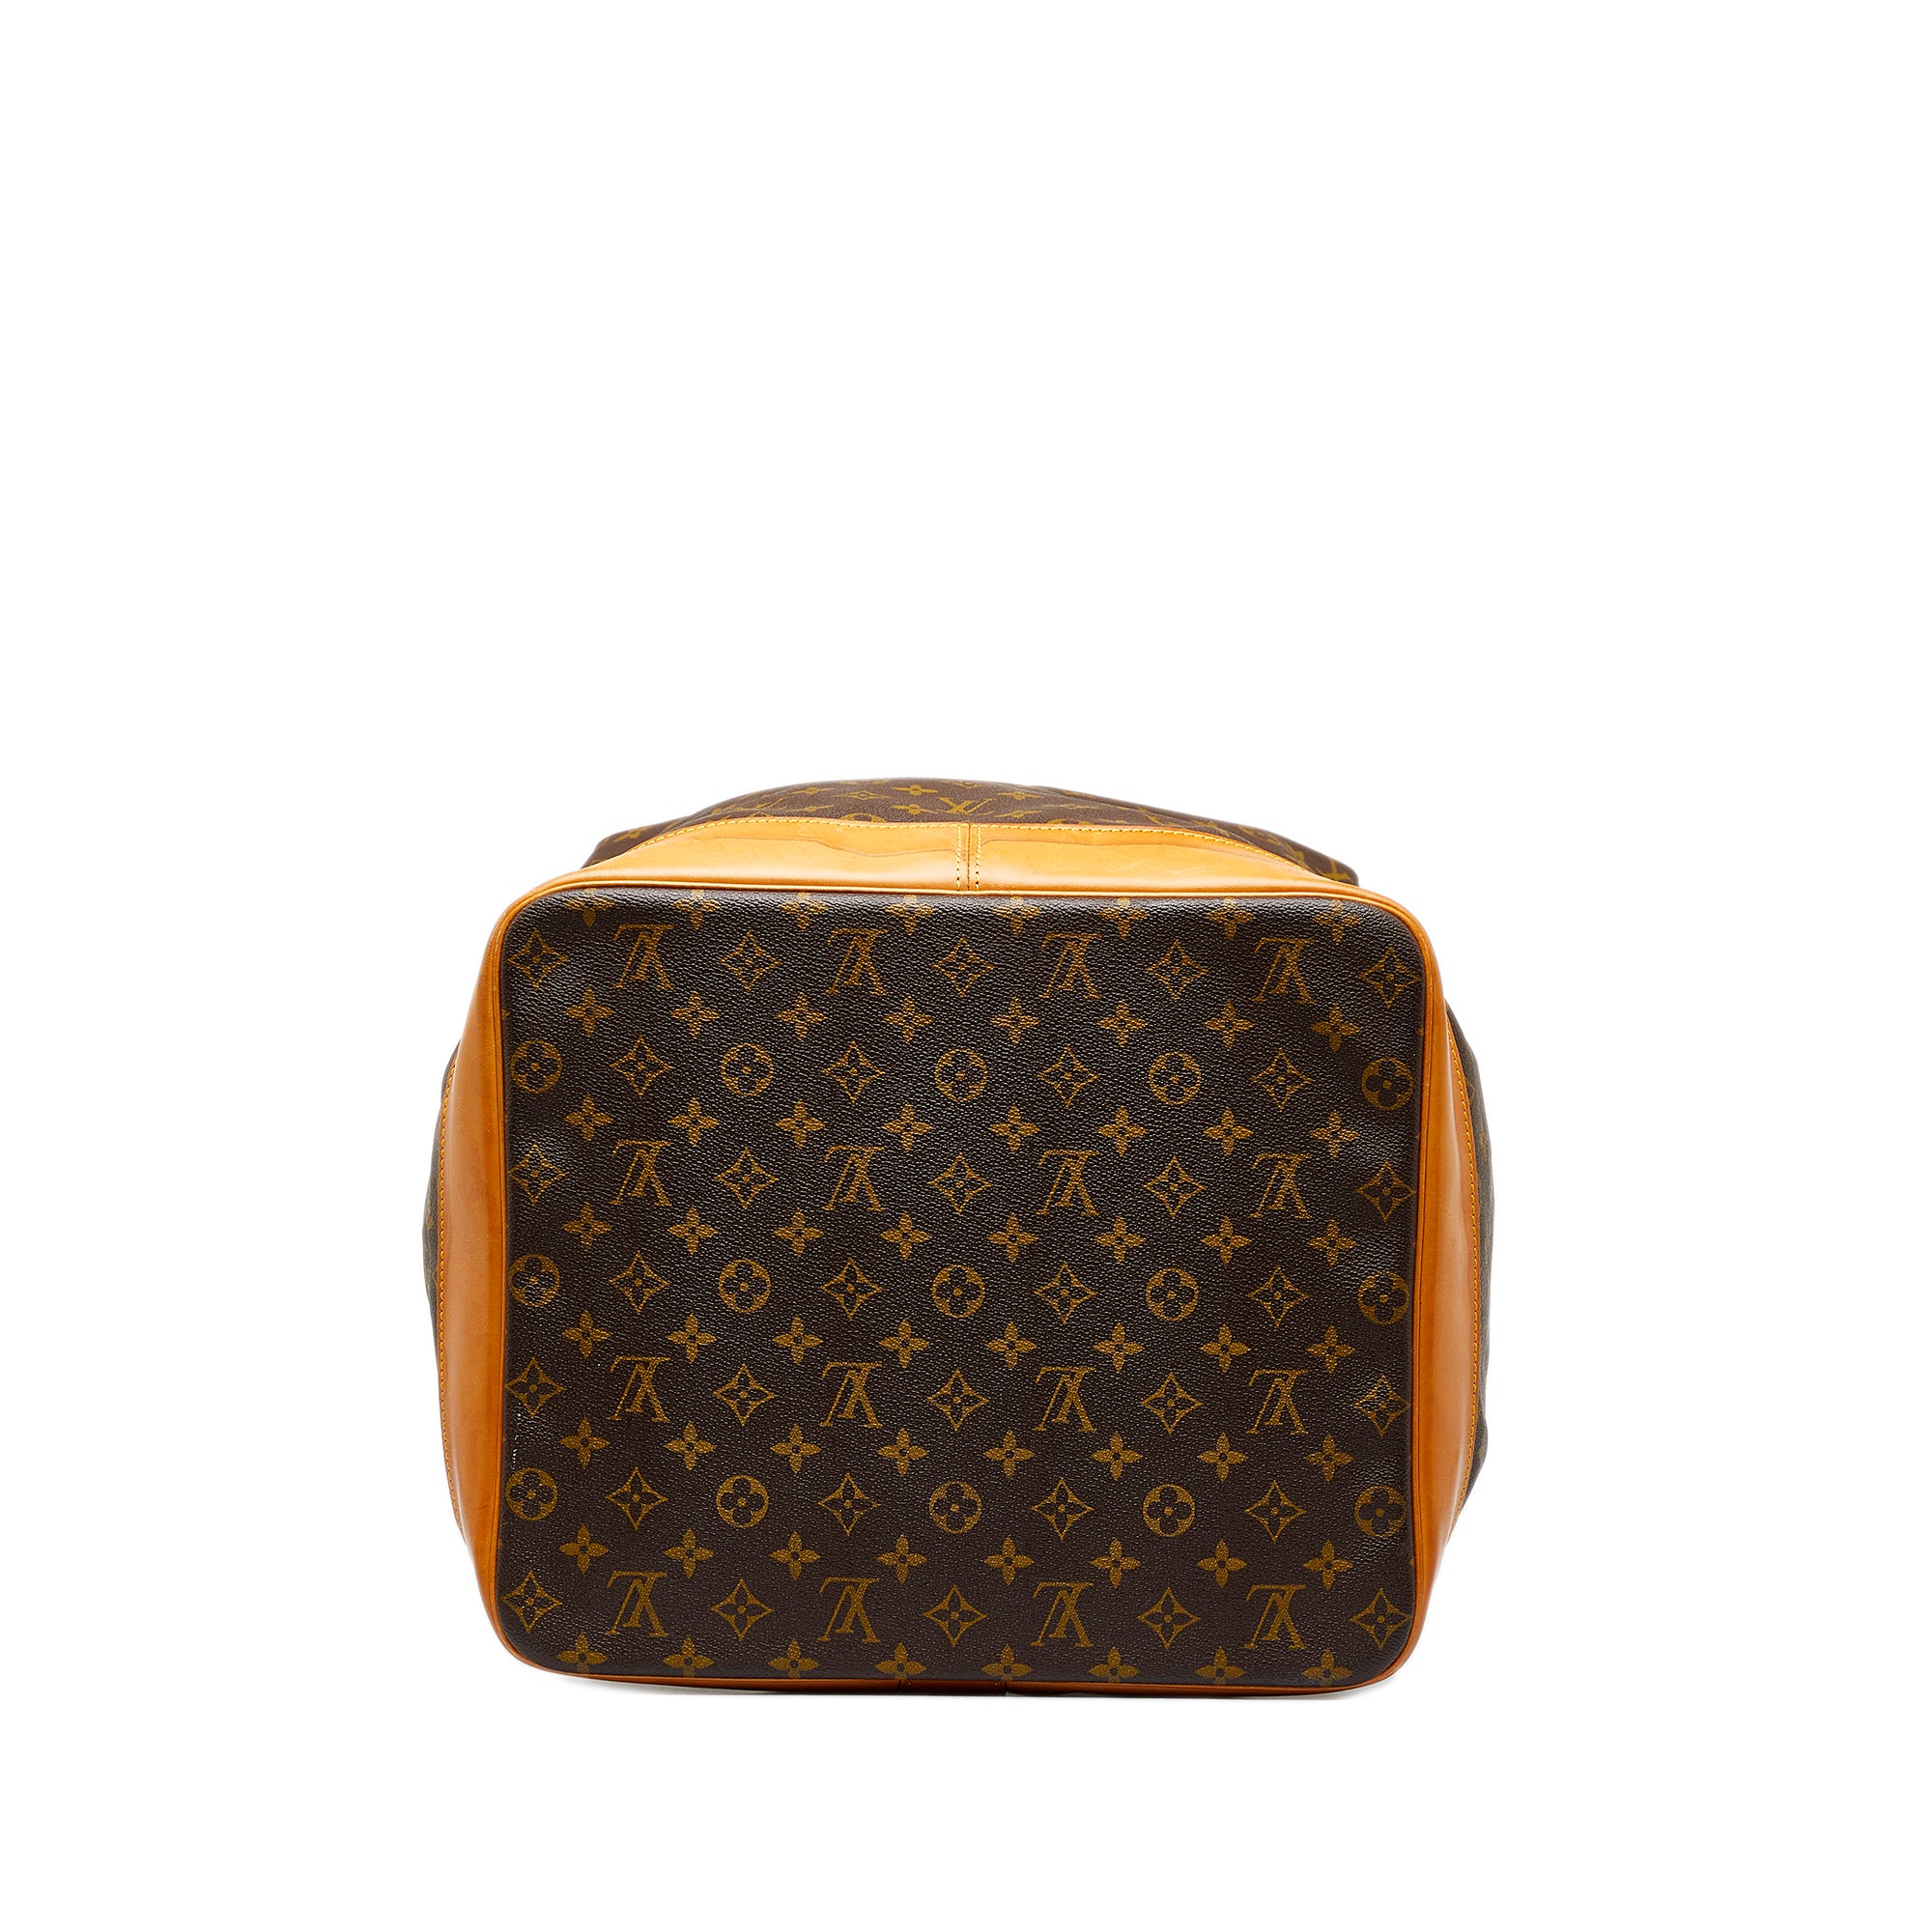 Louis Vuitton Sac Marin Sailor Bandouliere GM - Brown Luggage and